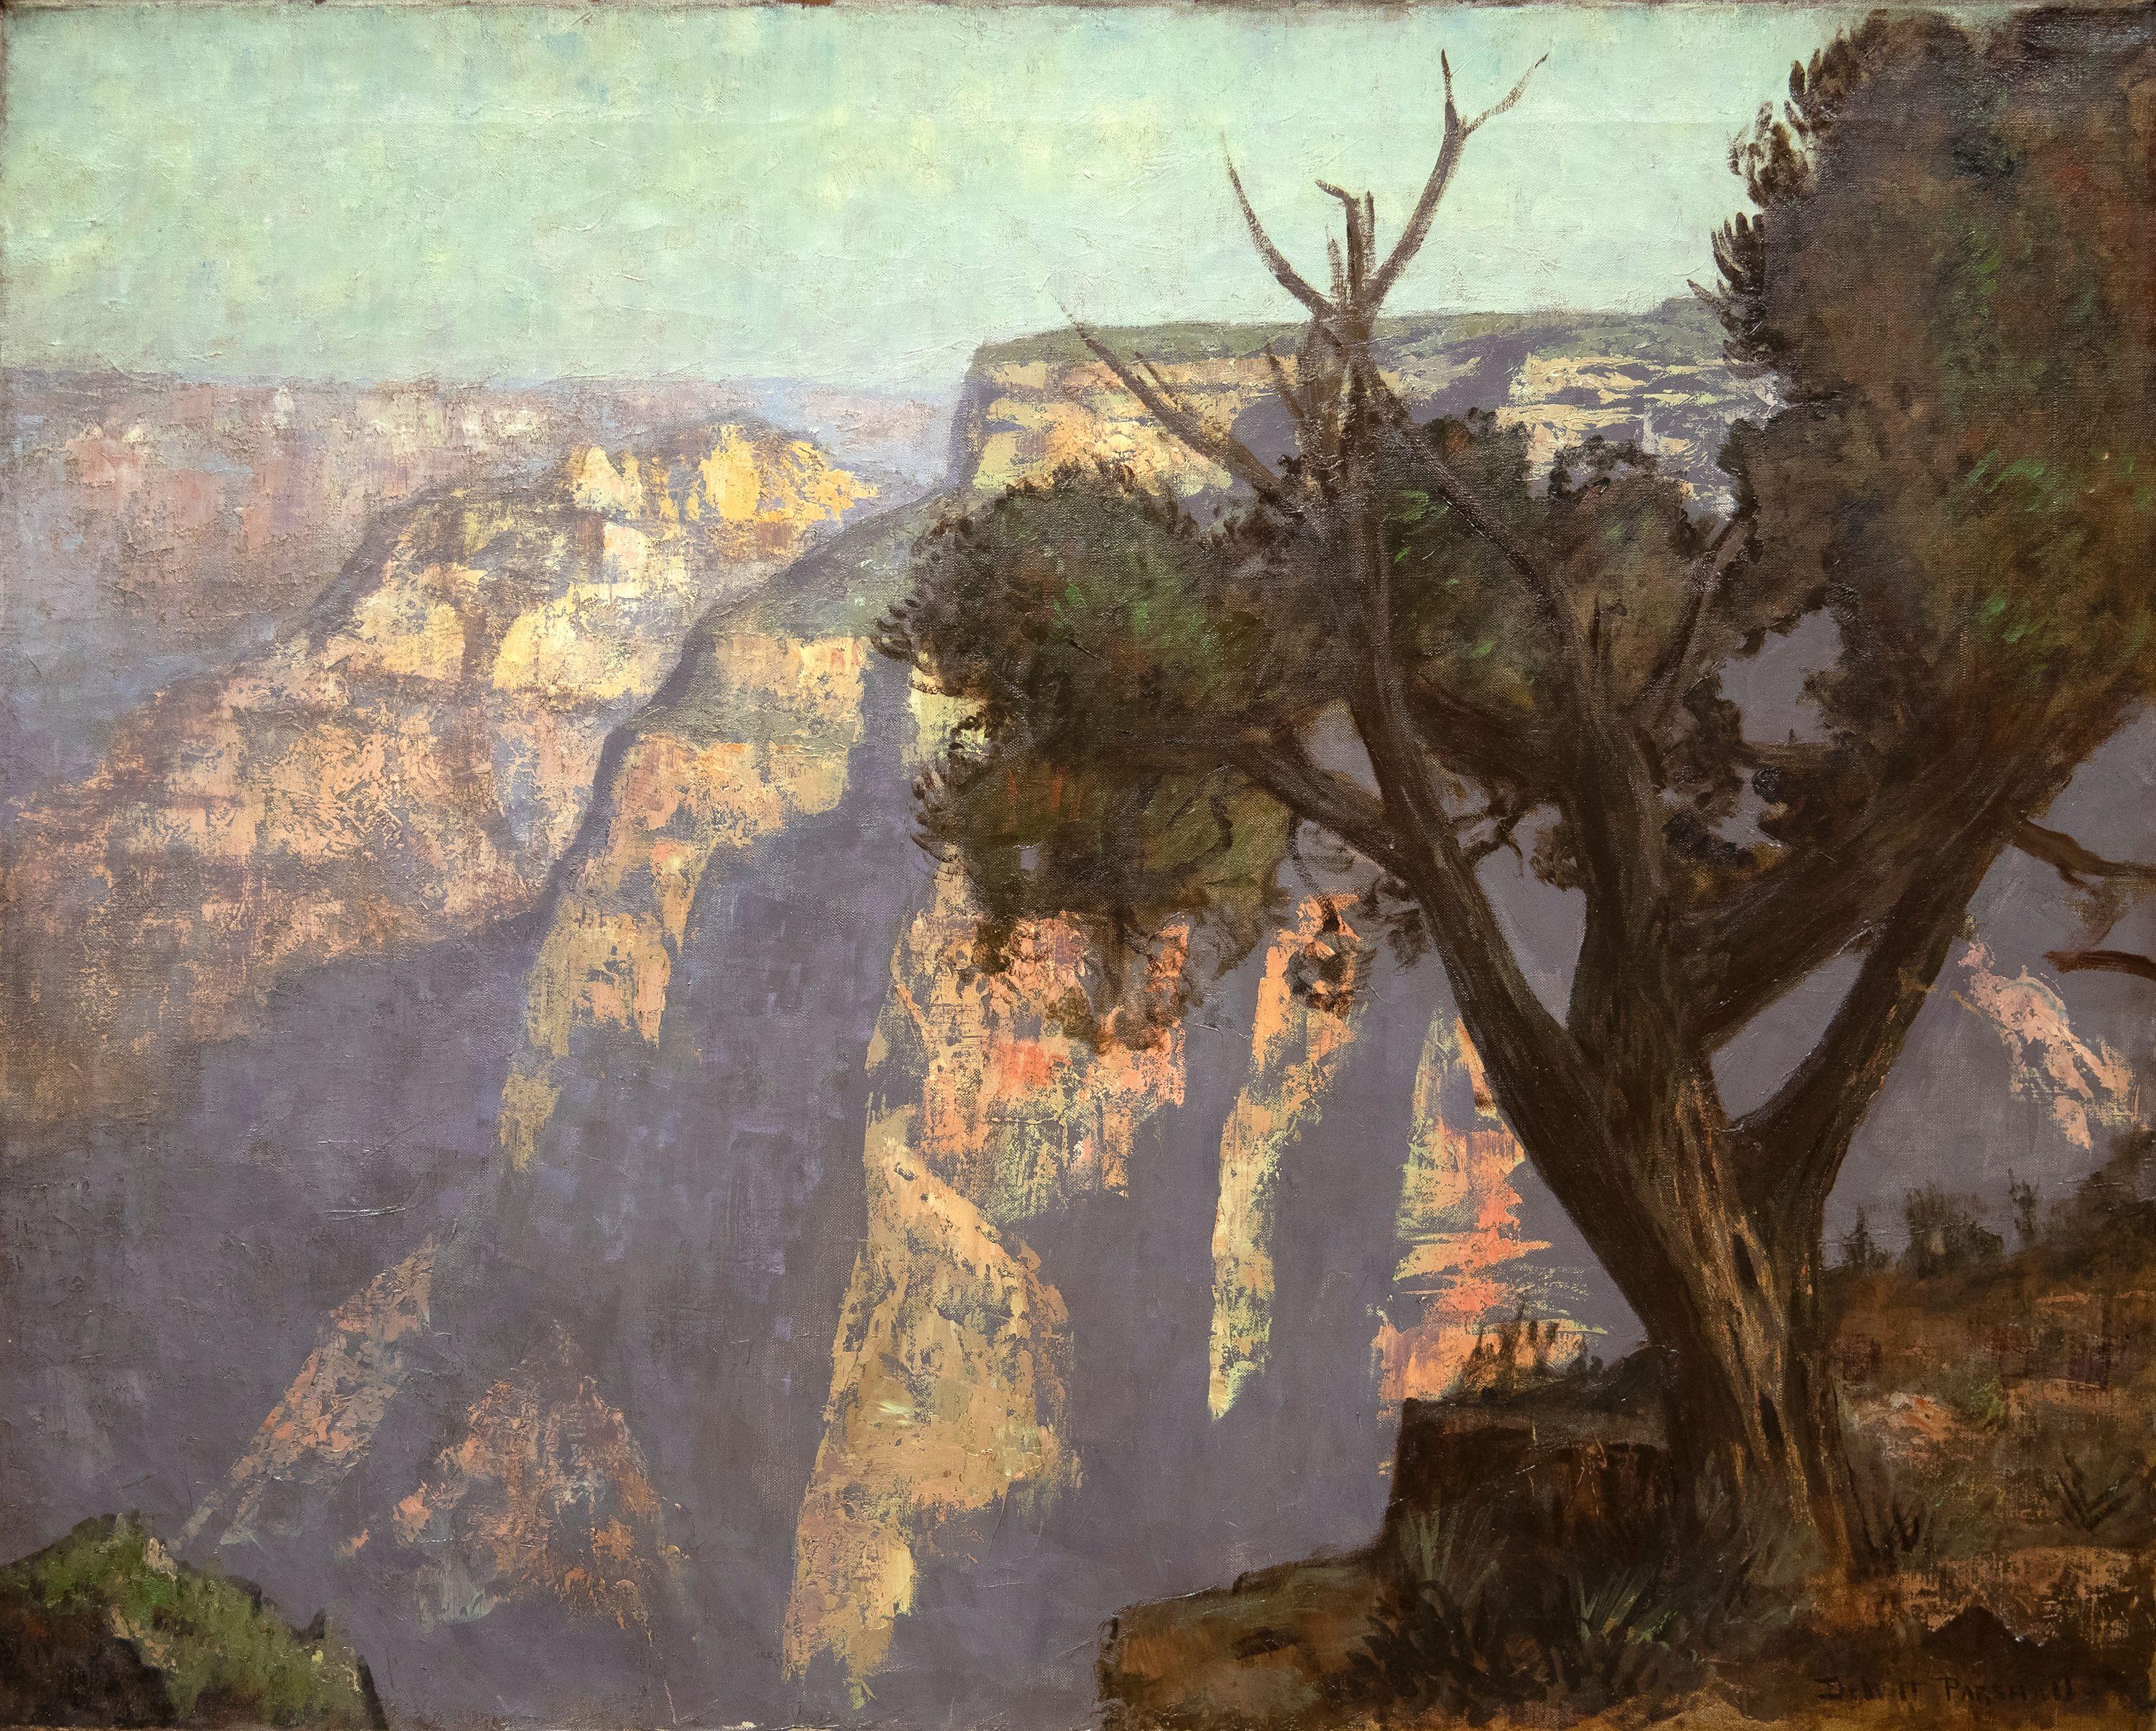 PARSHALL, DEWITT Landscape Painting - Hermit Creek Canyon, Grand Canyon